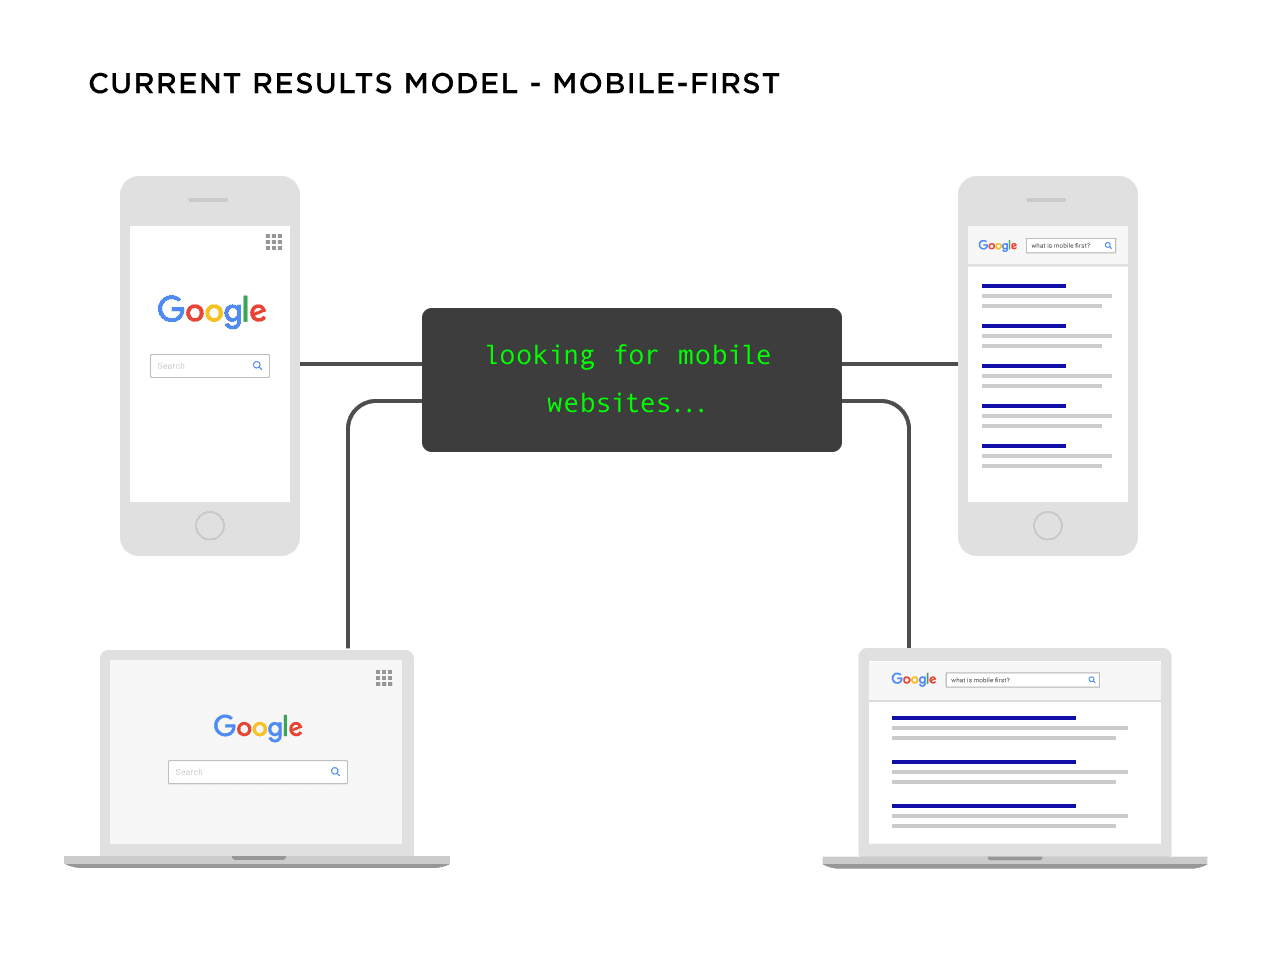 Google Mobile First Search Model